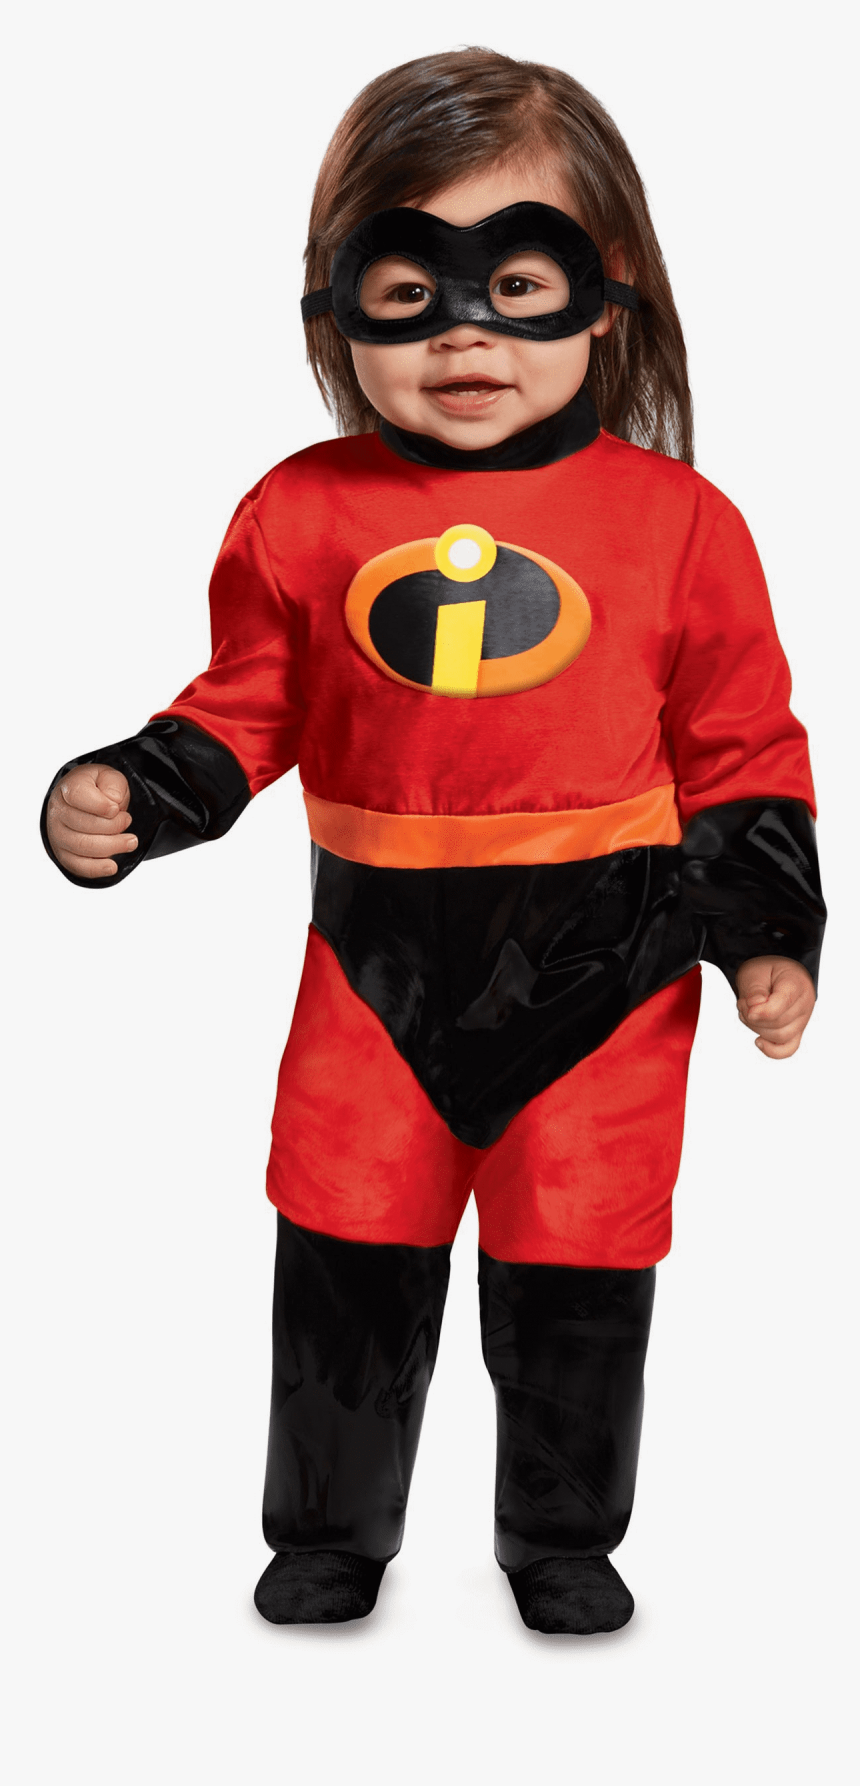 Baby"s Classic The Incredibles Costume 12-18 Months - Jack Jack Incredibles Halloween, HD Png Download, Free Download